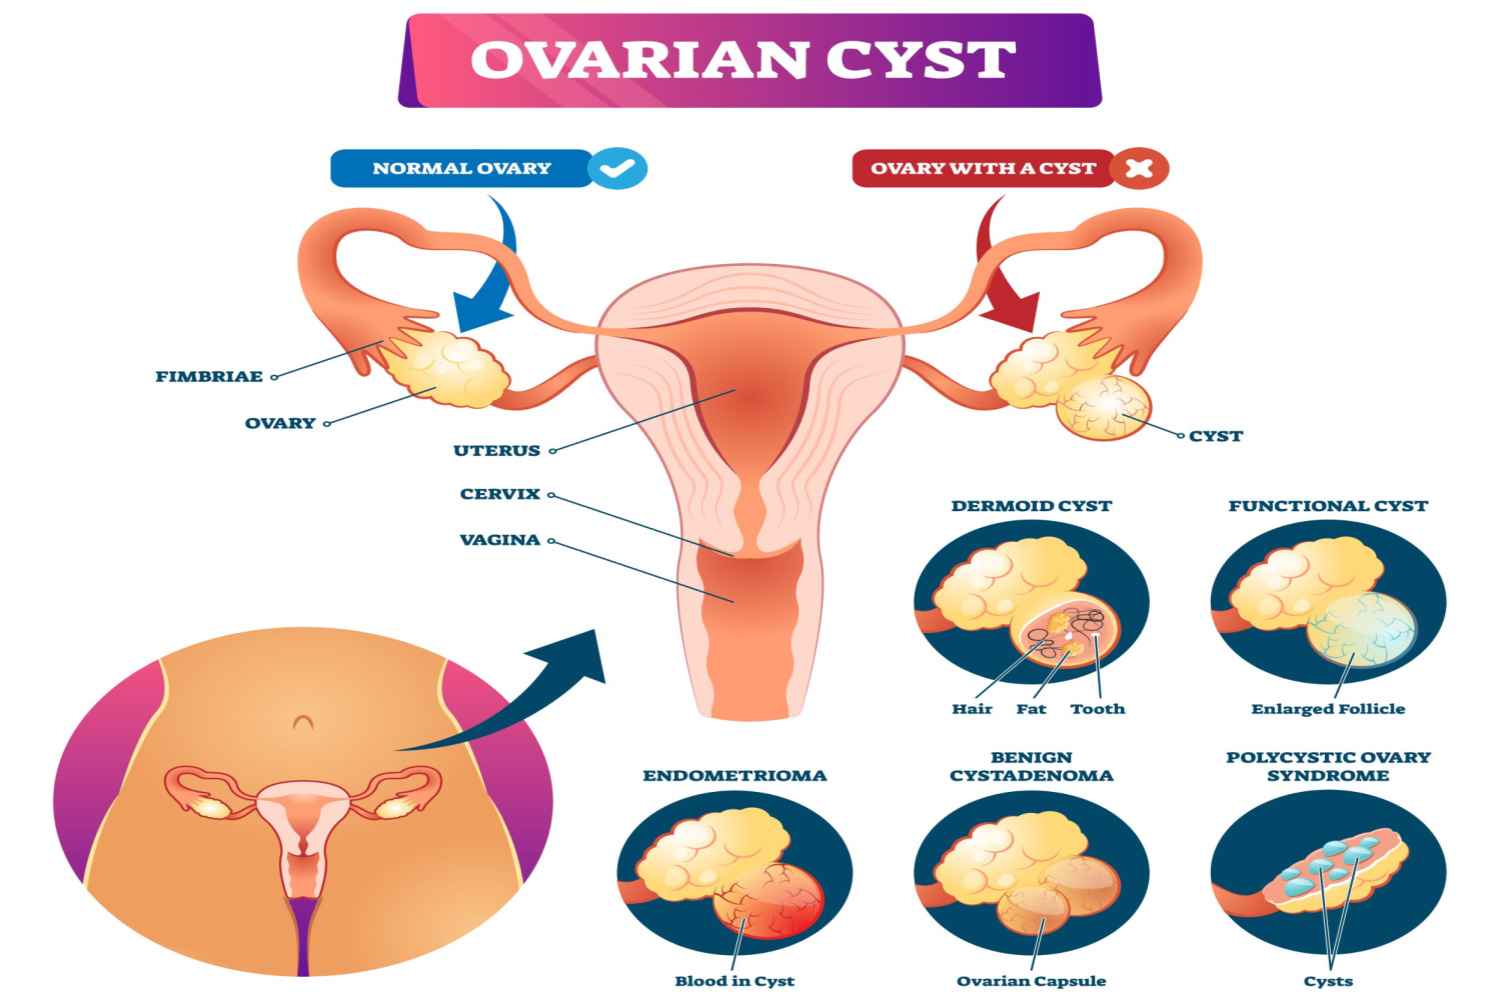 Ovarian Cyst and pregnancy